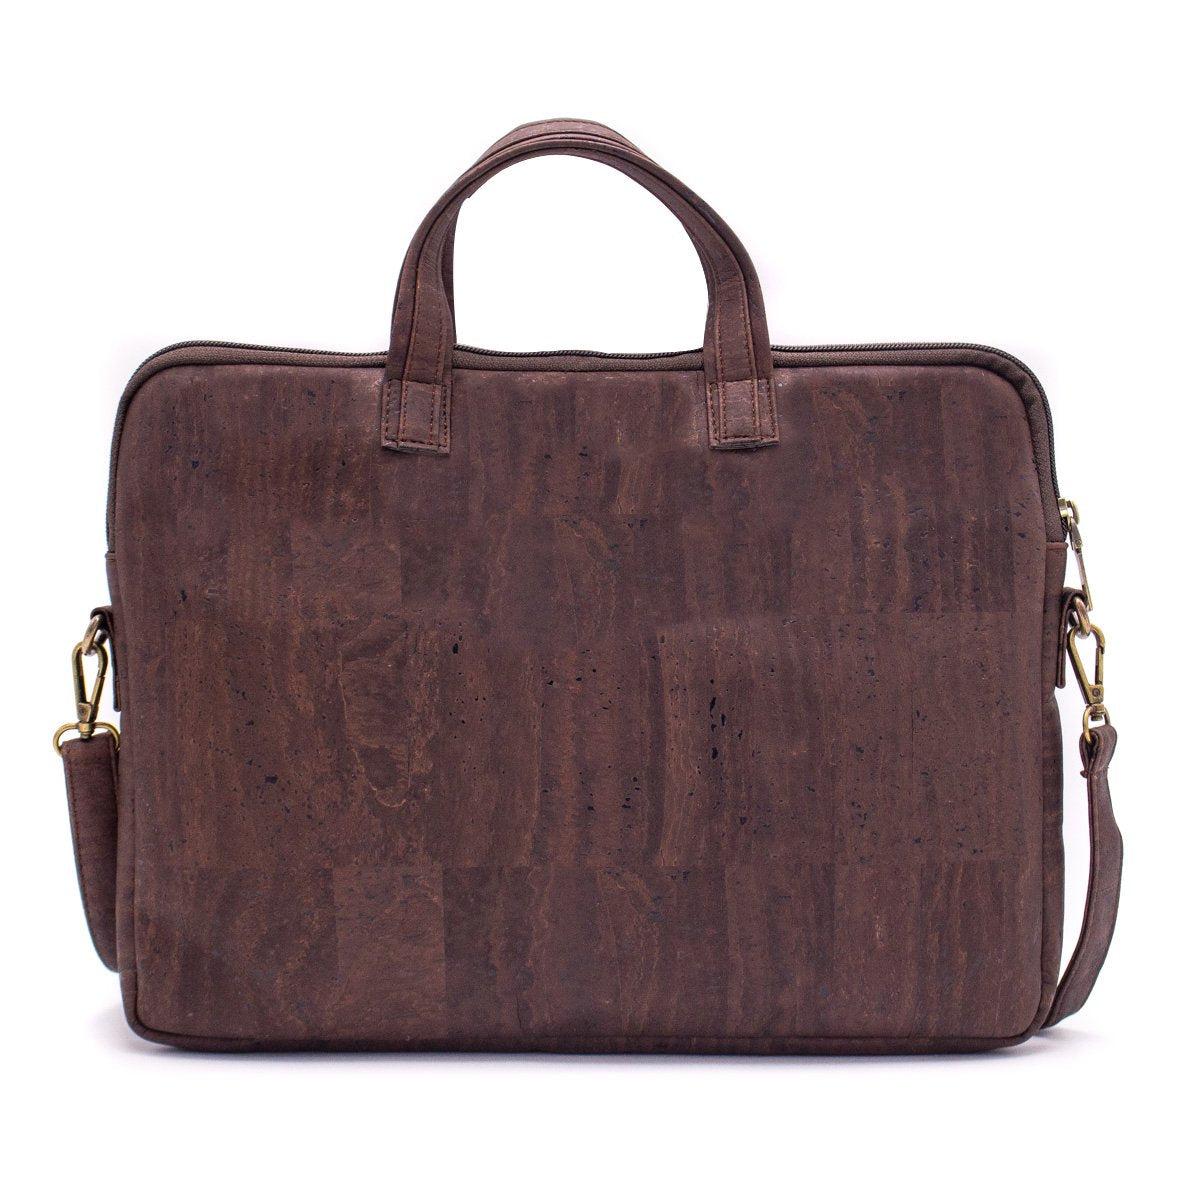 Natural Cork Vegan Leather 15" Laptop Briefcase | THE CORK COLLECTION